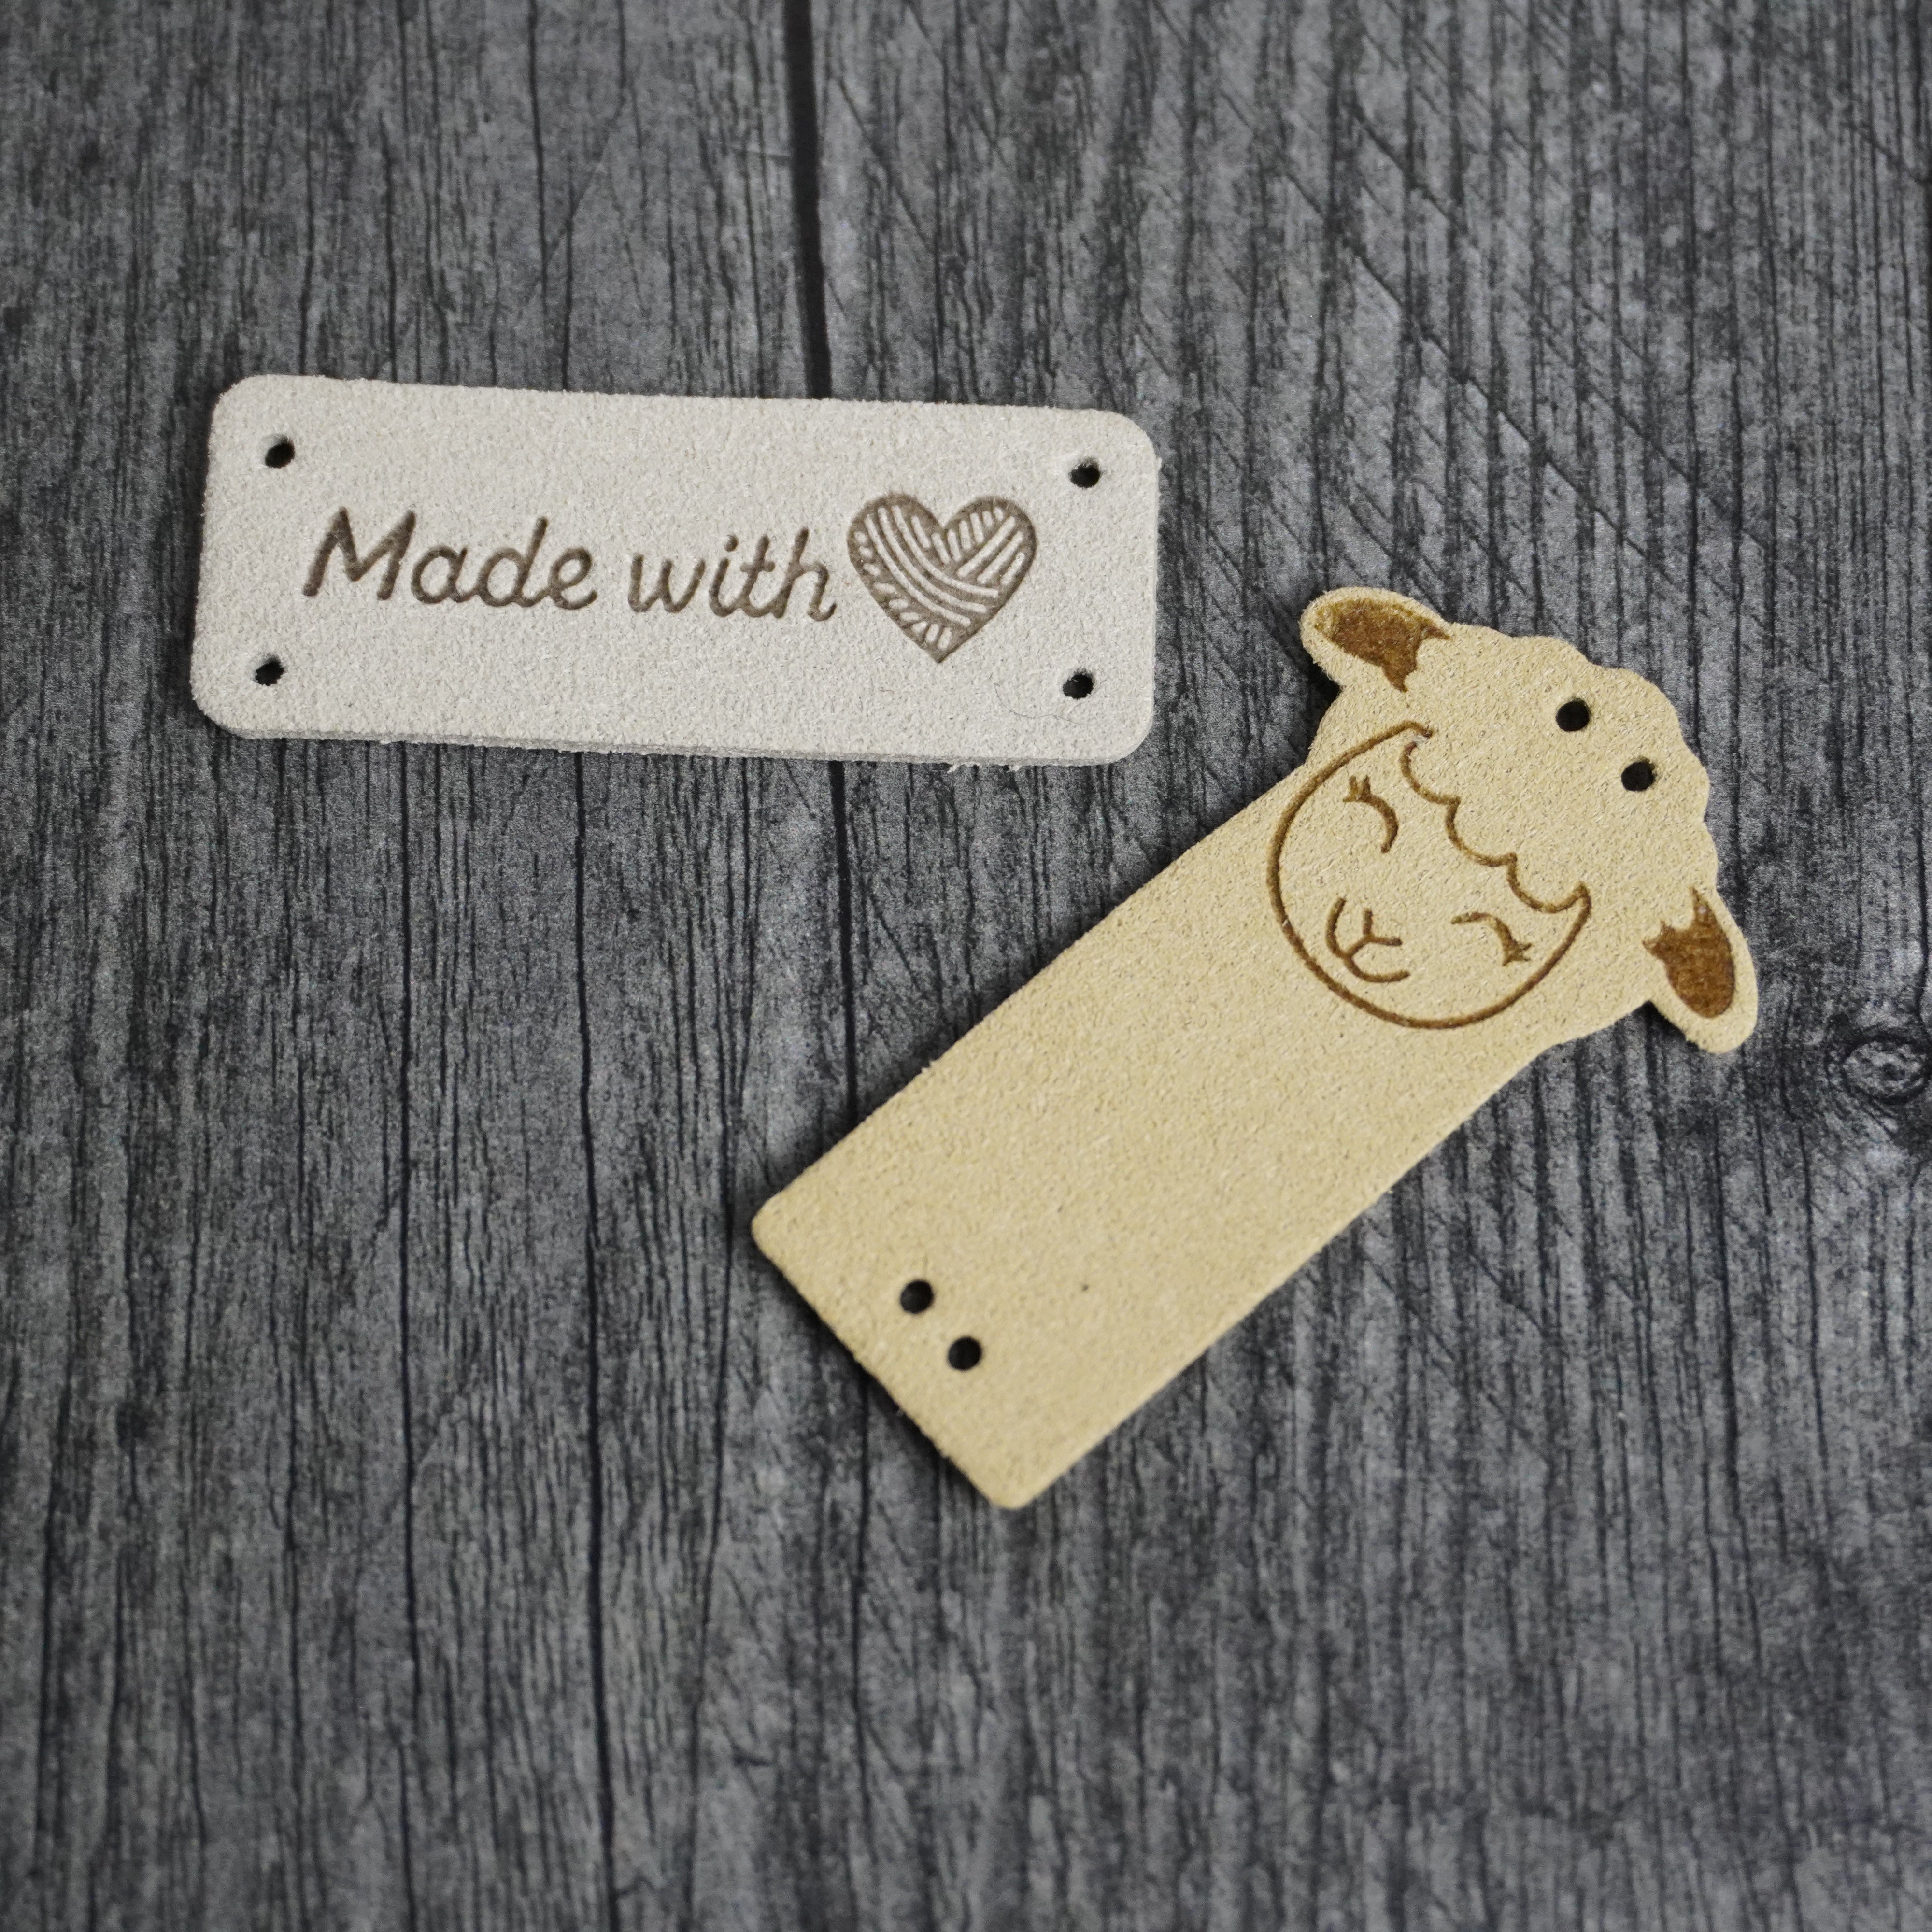 Made with Love Garment Tags